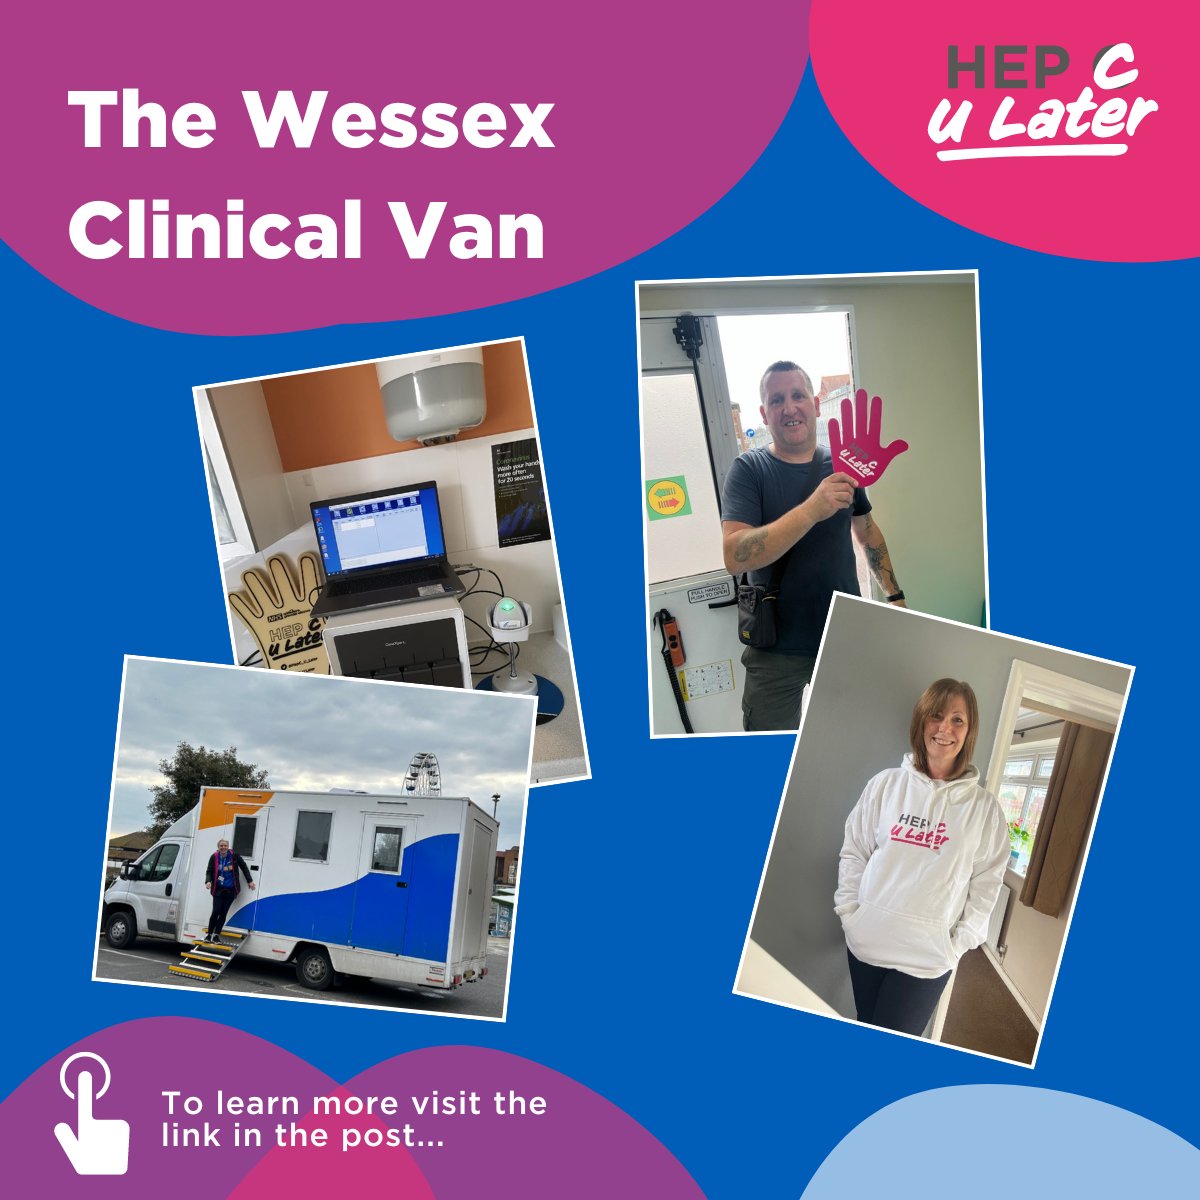 The Wessex Clinical Van team is an initiative introduced by Inclusion and the Wessex ODN, part of NHS England's national elimination programme, to deliver hepatitis C testing to at risk communities.  

Find out more about the work the team undertake -  orlo.uk/K5Ir6